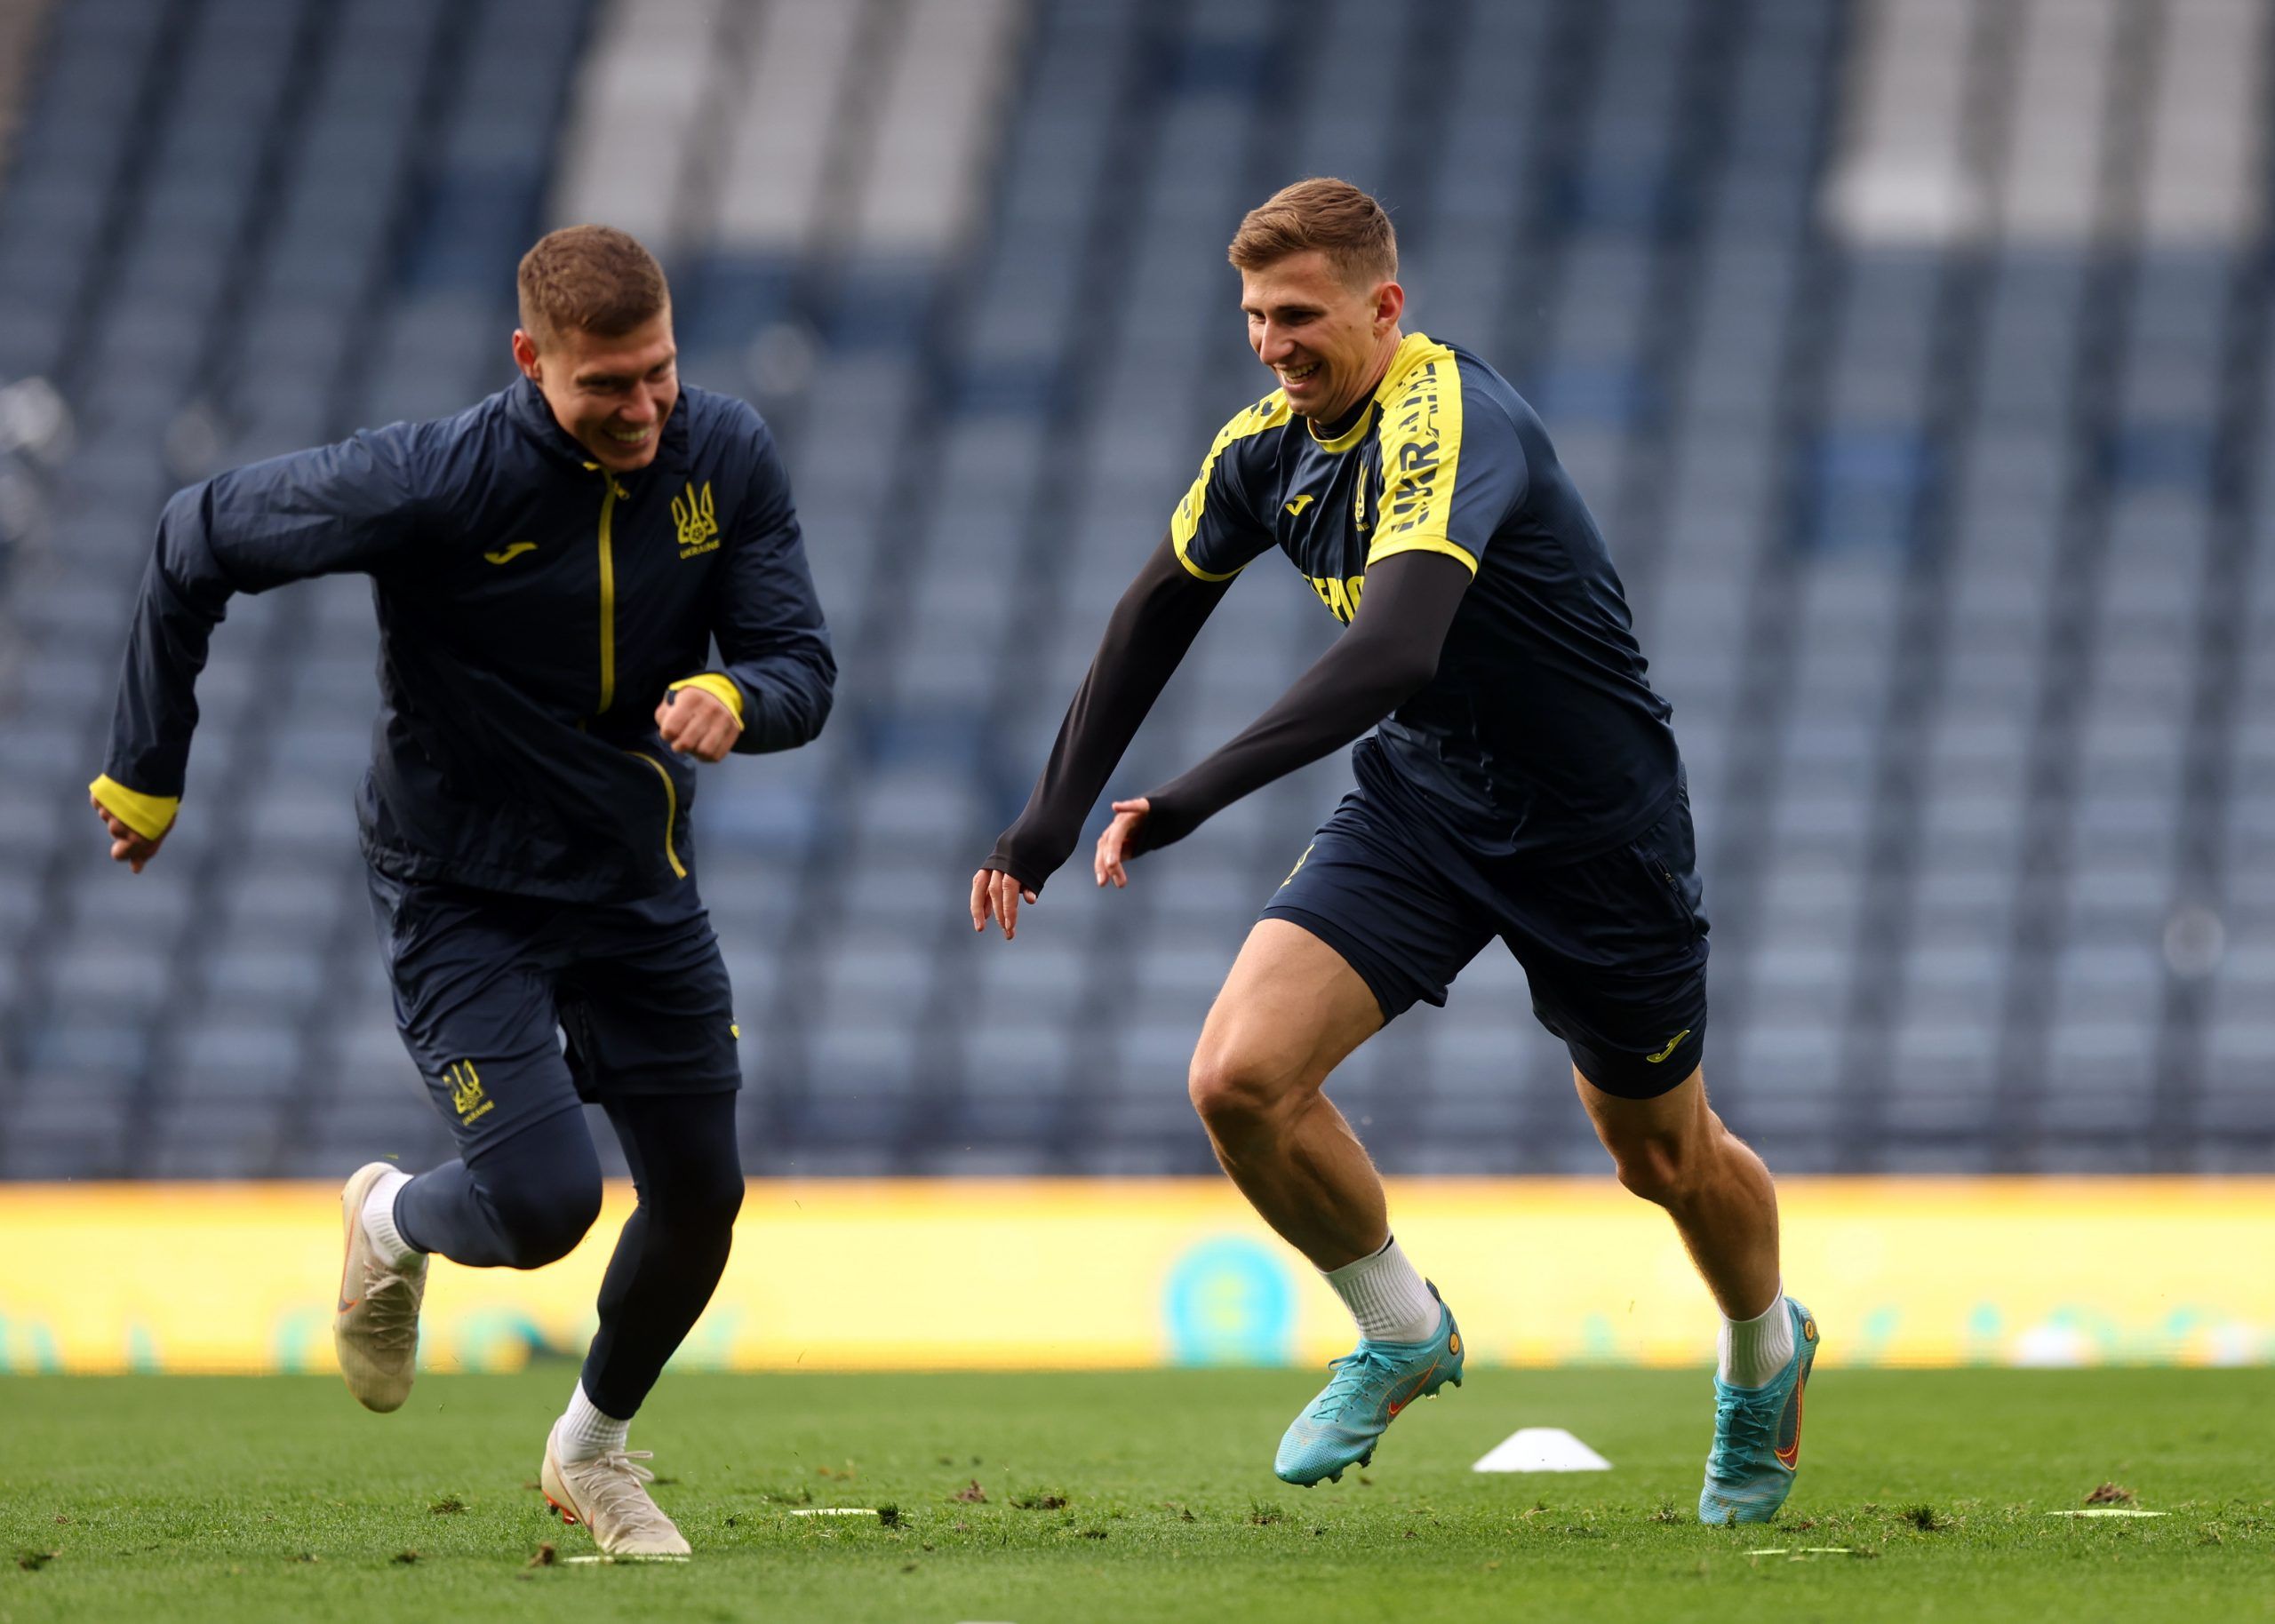 Soccer Football - FIFA World Cup - UEFA Qualifiers - Ukraine Training - Hampden Park, Glasgow, Scotland, Britain - May 31, 2022 Ukraine's Illya Zabarnyi in action during training Action Images via Reuters/Lee Smith